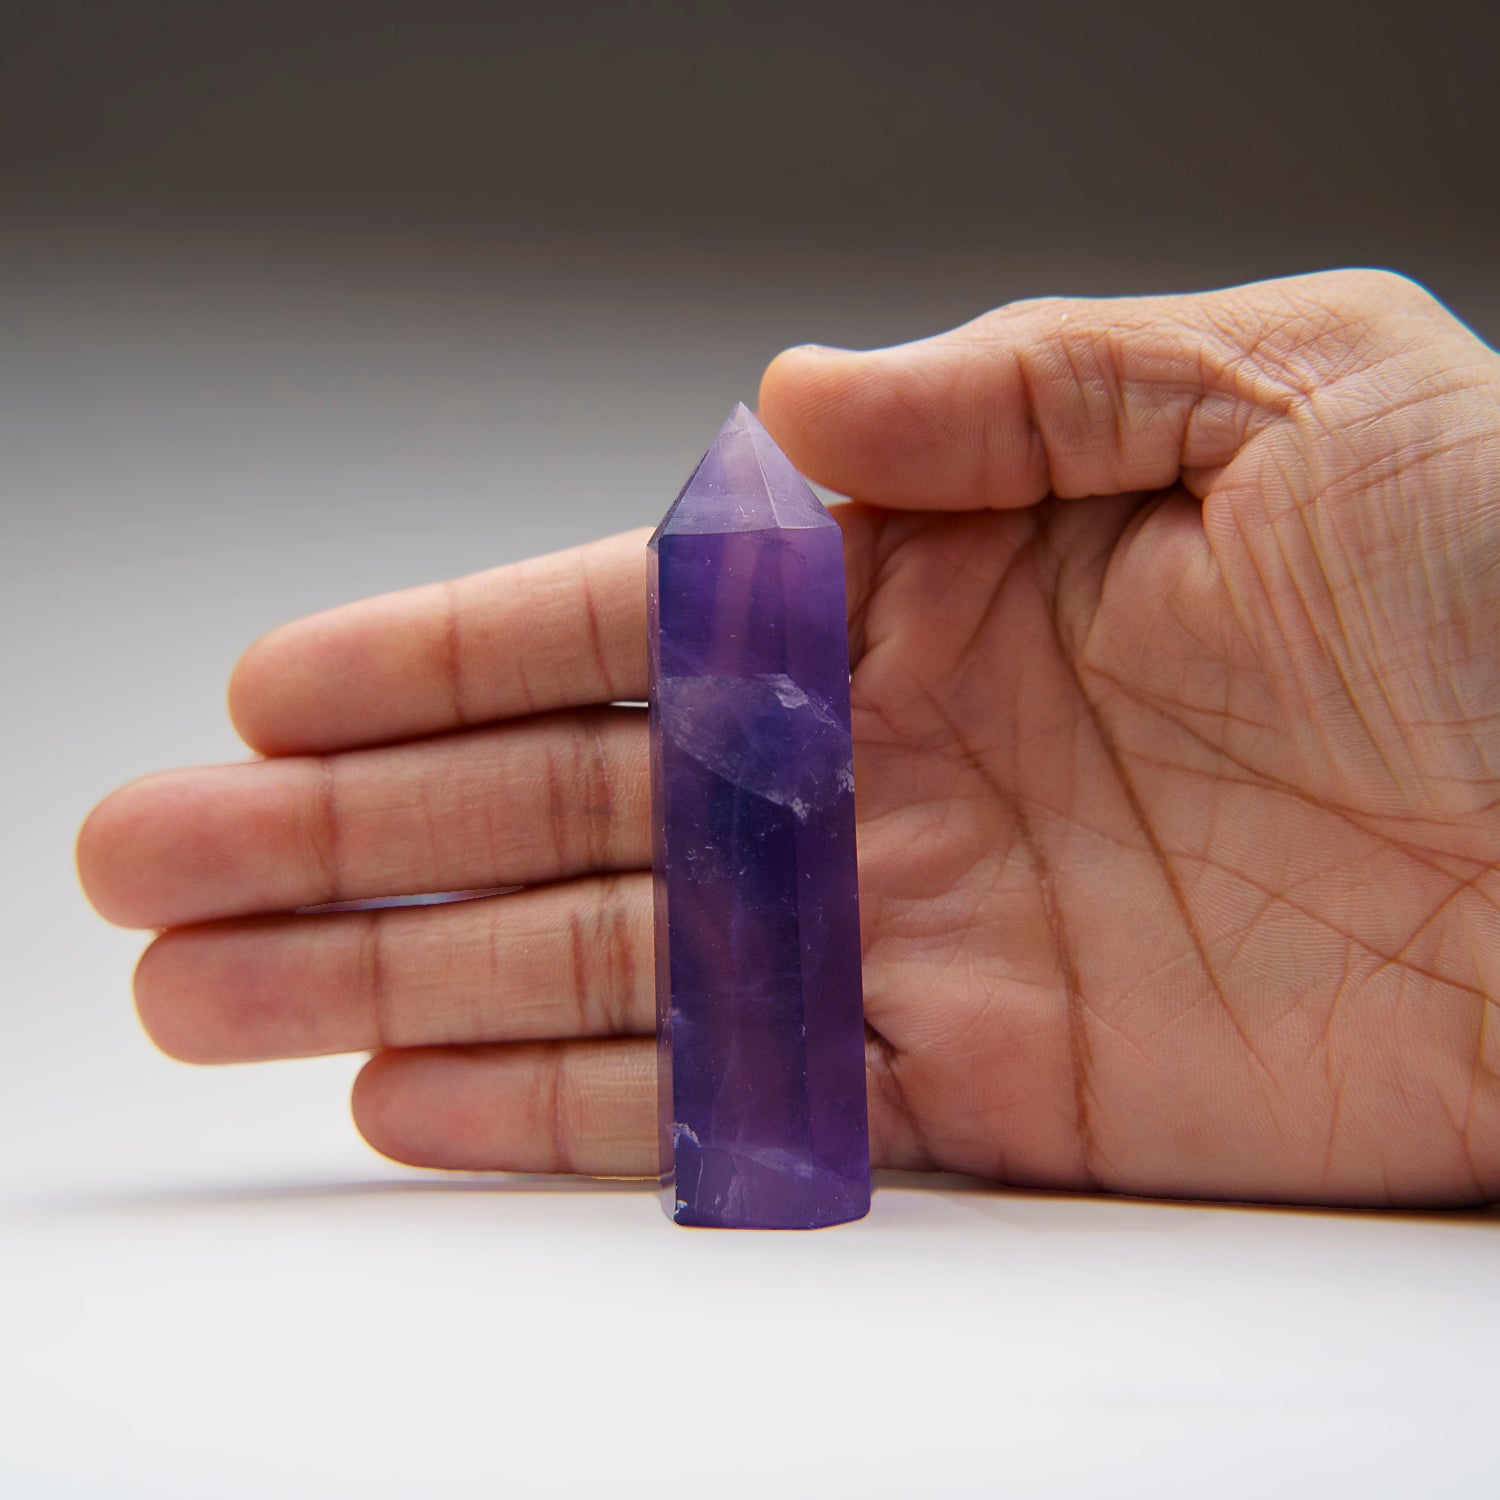 Genuine Polished Purple Fluorite Point from China (90 grams)